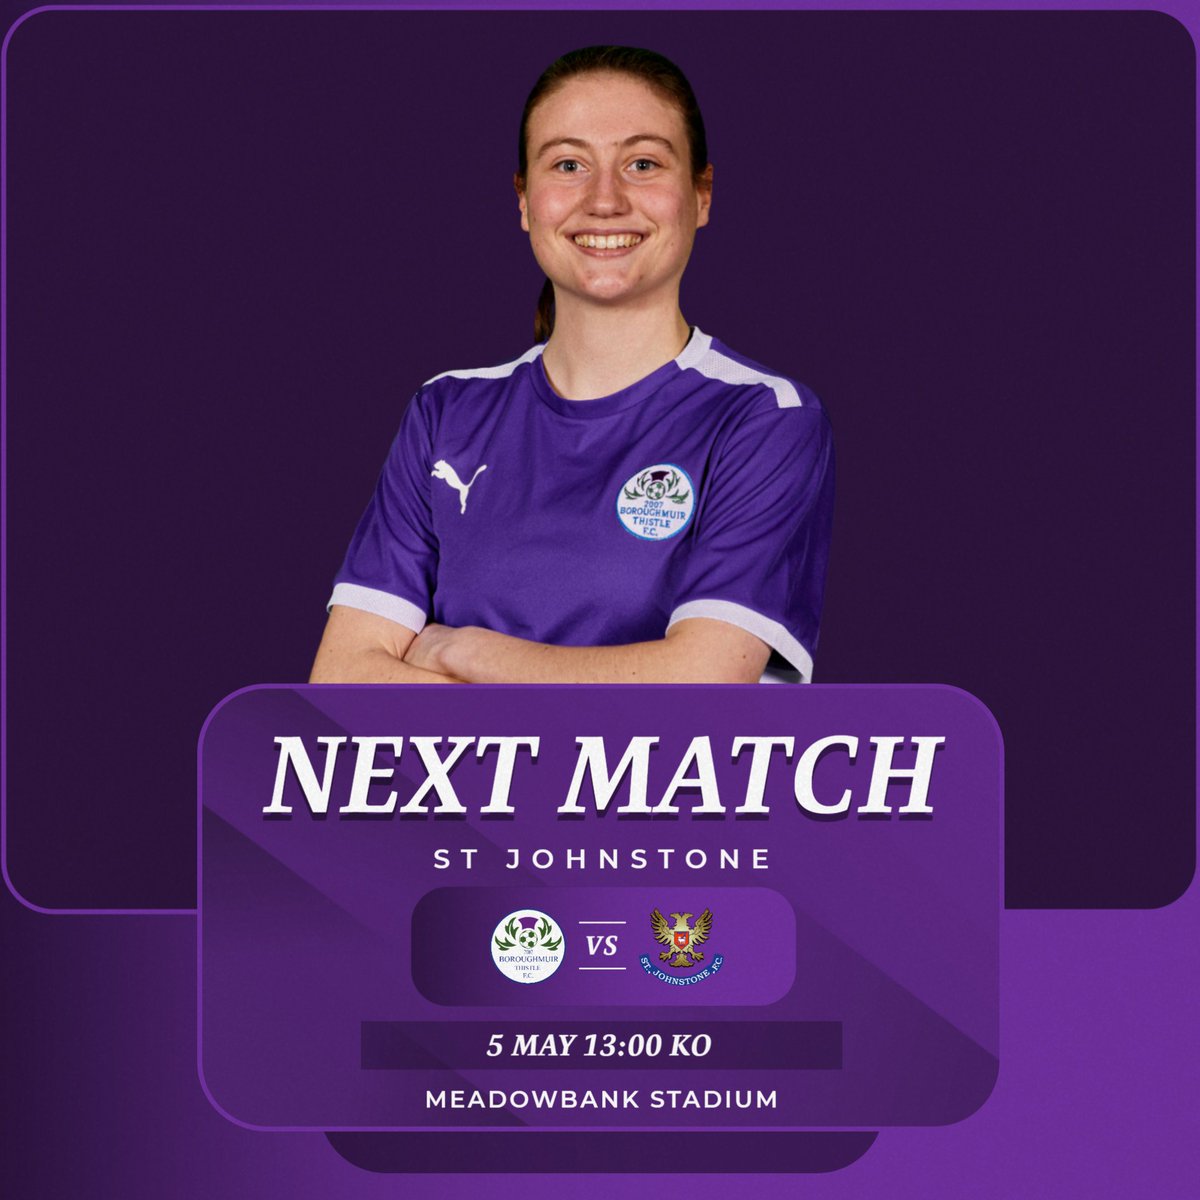 𝗡𝗘𝗫𝗧 𝗠𝗔𝗧𝗖𝗛 🤝 We are back at in action this Sunday, with a big game against @stjwfc in store. 🏆 @SWPL 🏟️ Meadowbank 🕛 1pm KO 🎟️ £6/£2 📝 Preview out tomorrow ➡️ Look out for matchday coverage on our dedicated Twitter account @thistlelive.